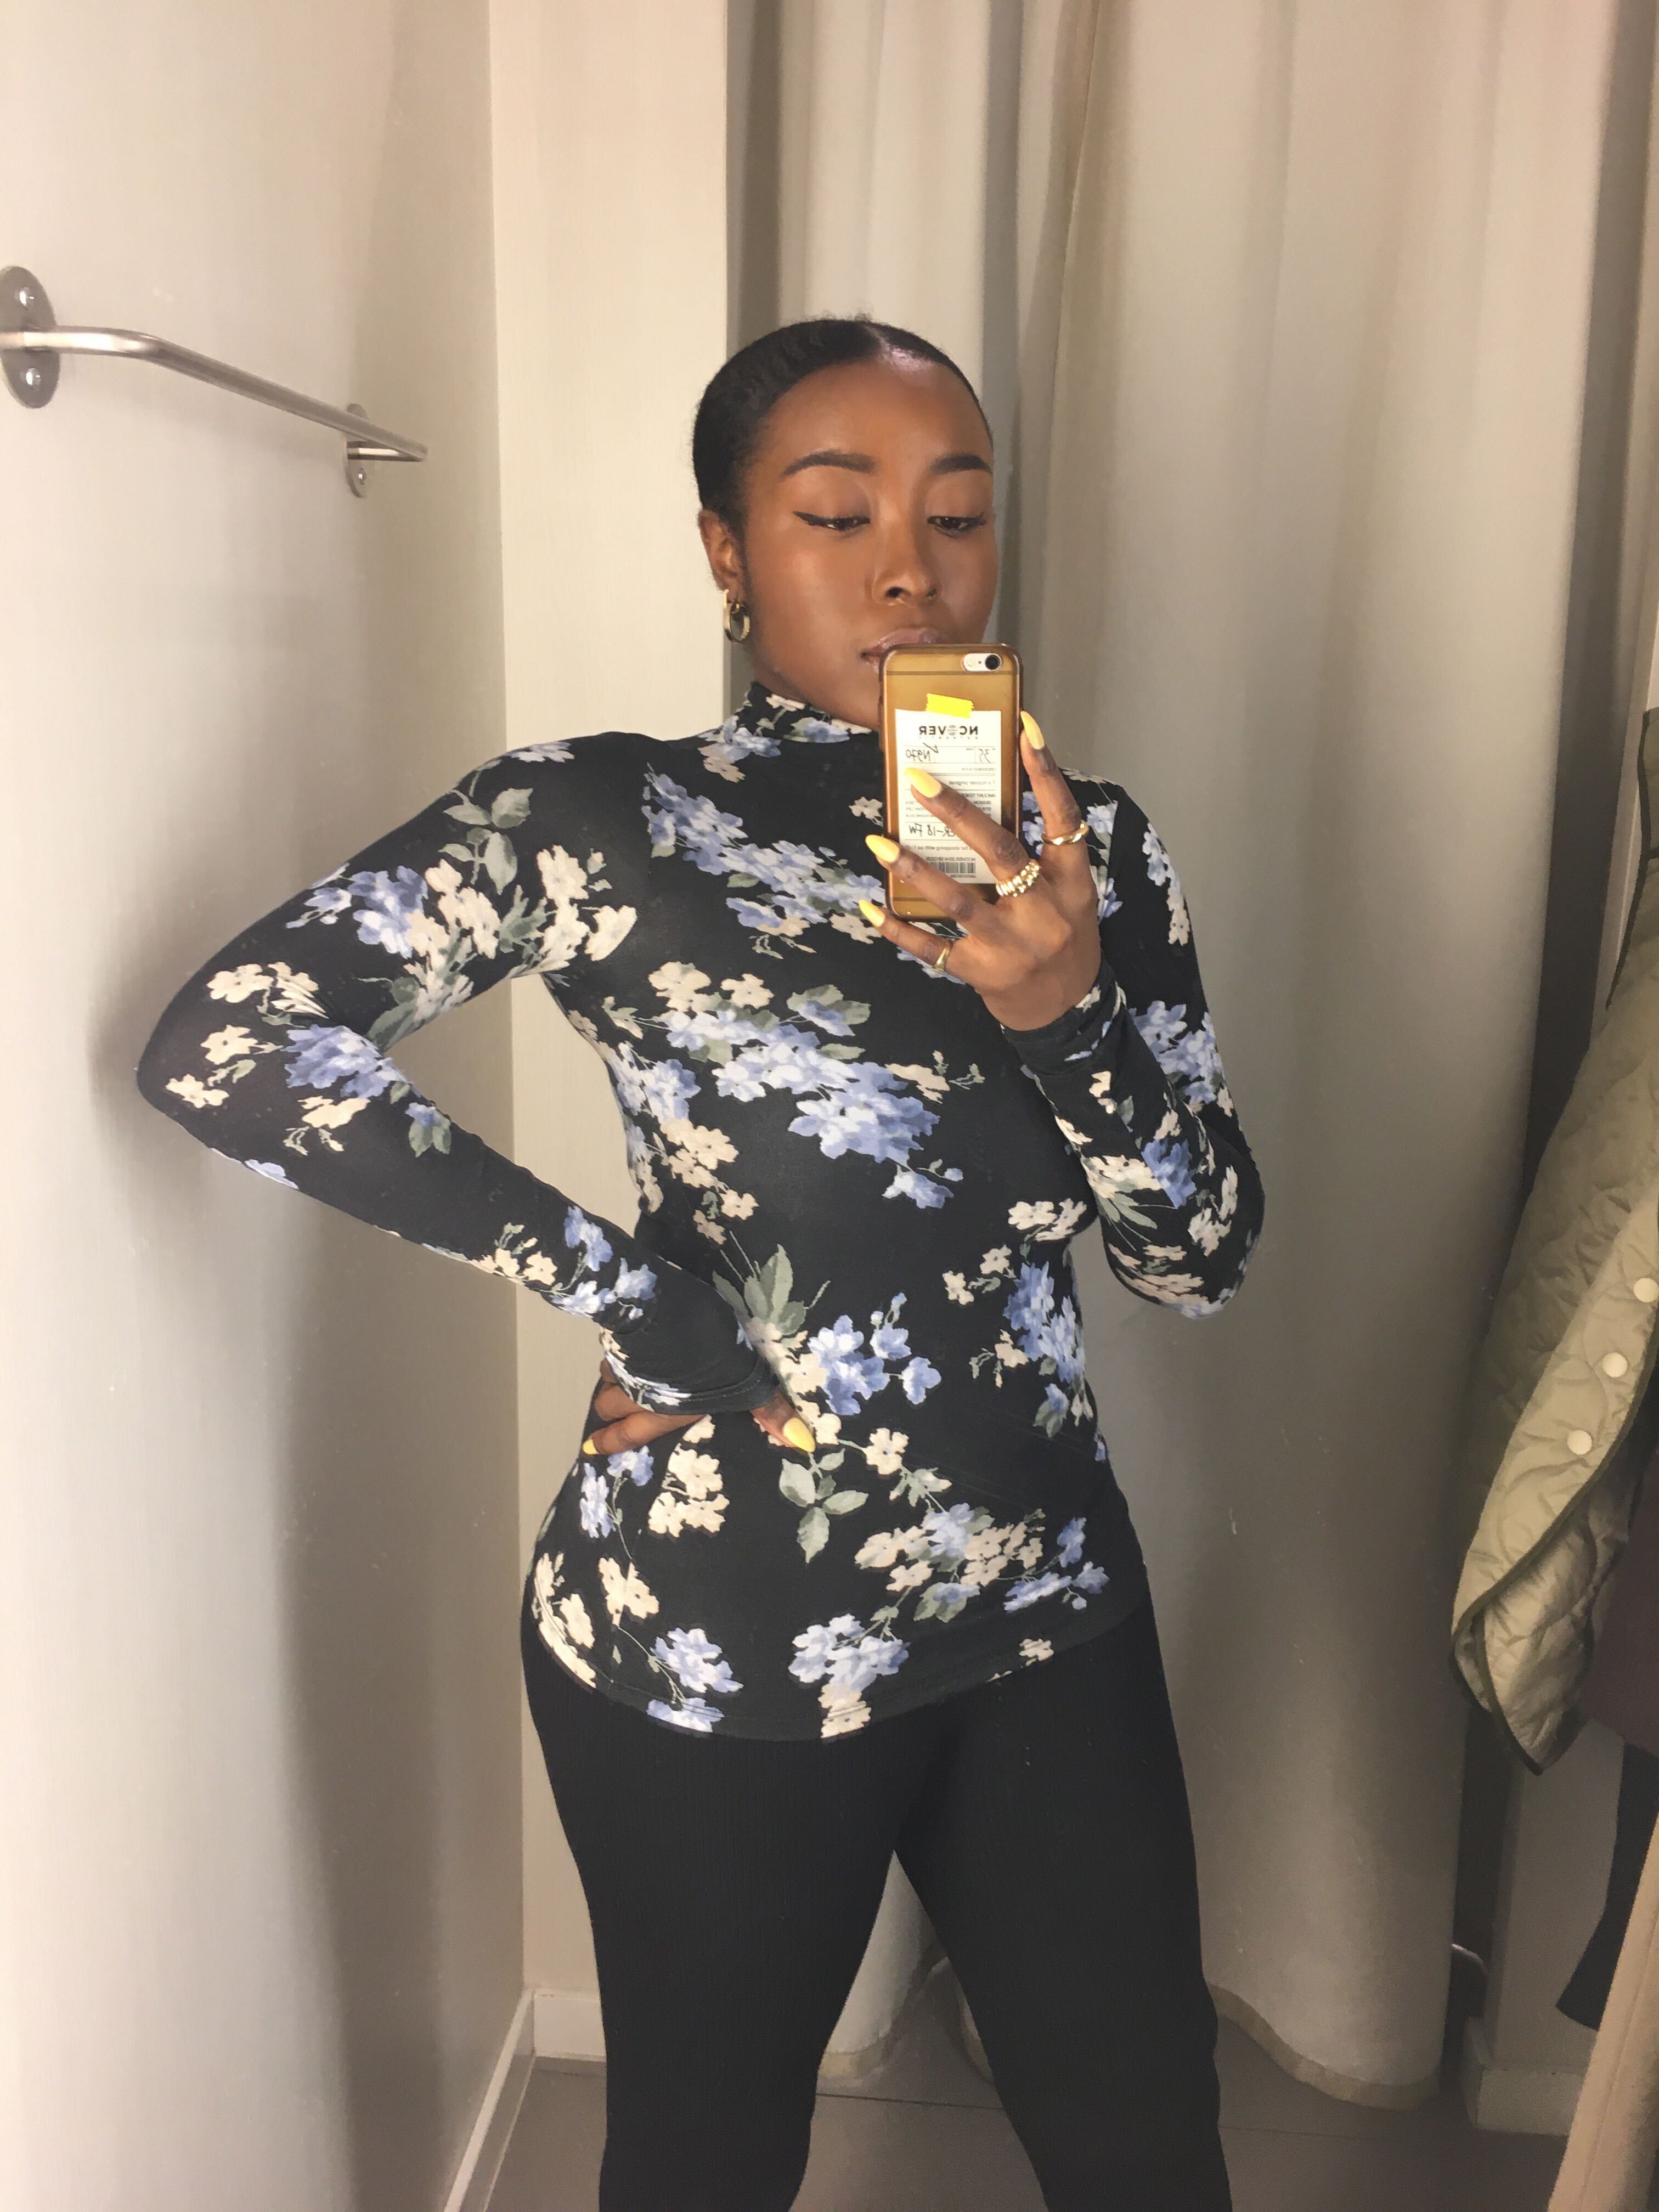 I Went to H&M, and These 11 Pieces Really Stood Out to Me